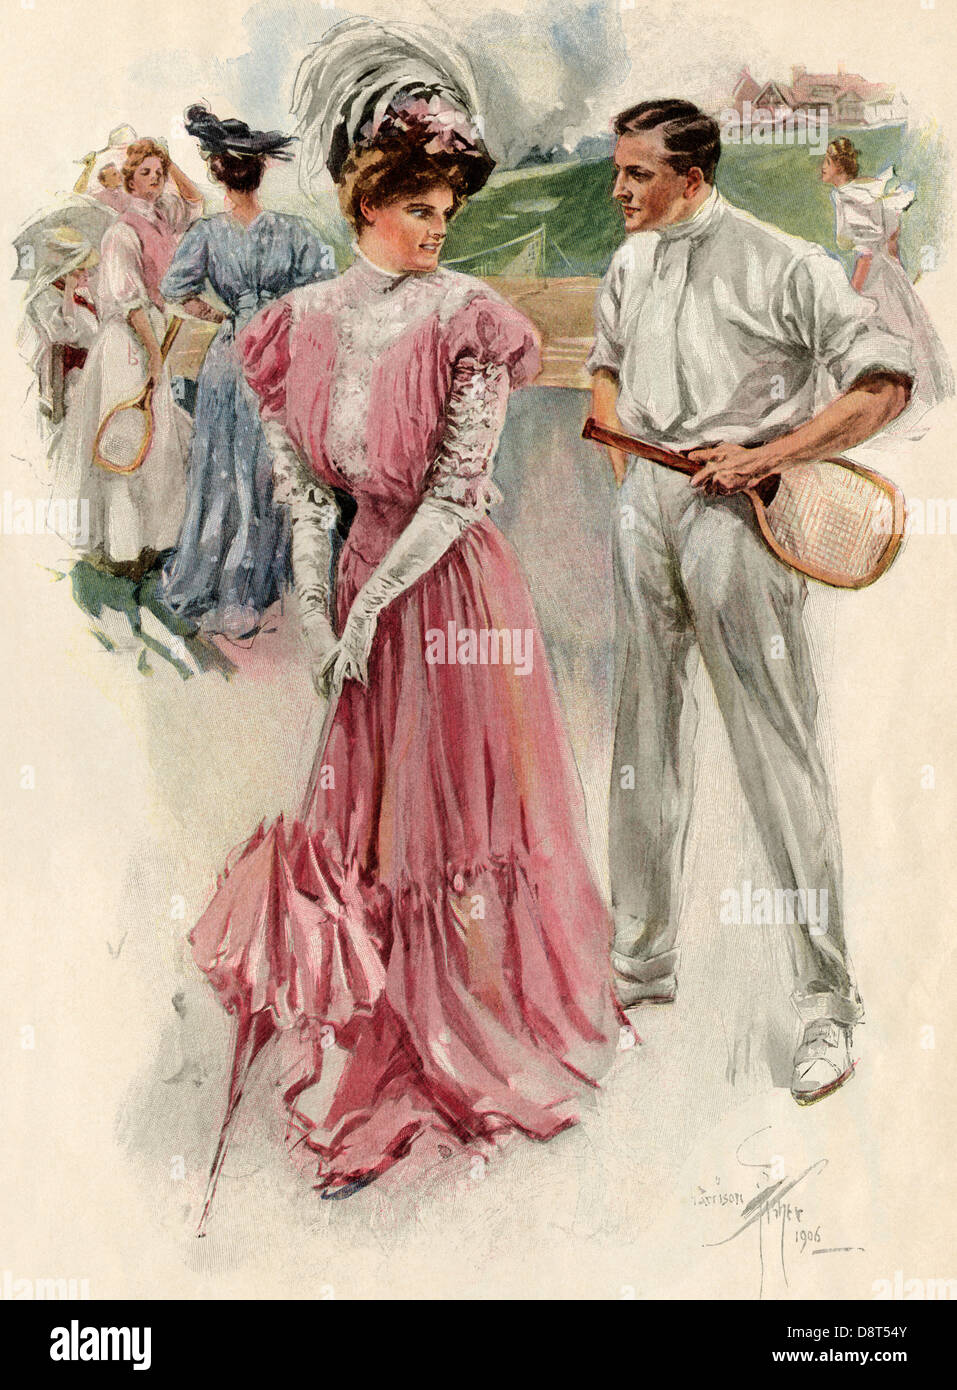 Tennis player distracted by a flirtatious, fashionable woman, circa 1900. Color halftone of an illustration Stock Photo